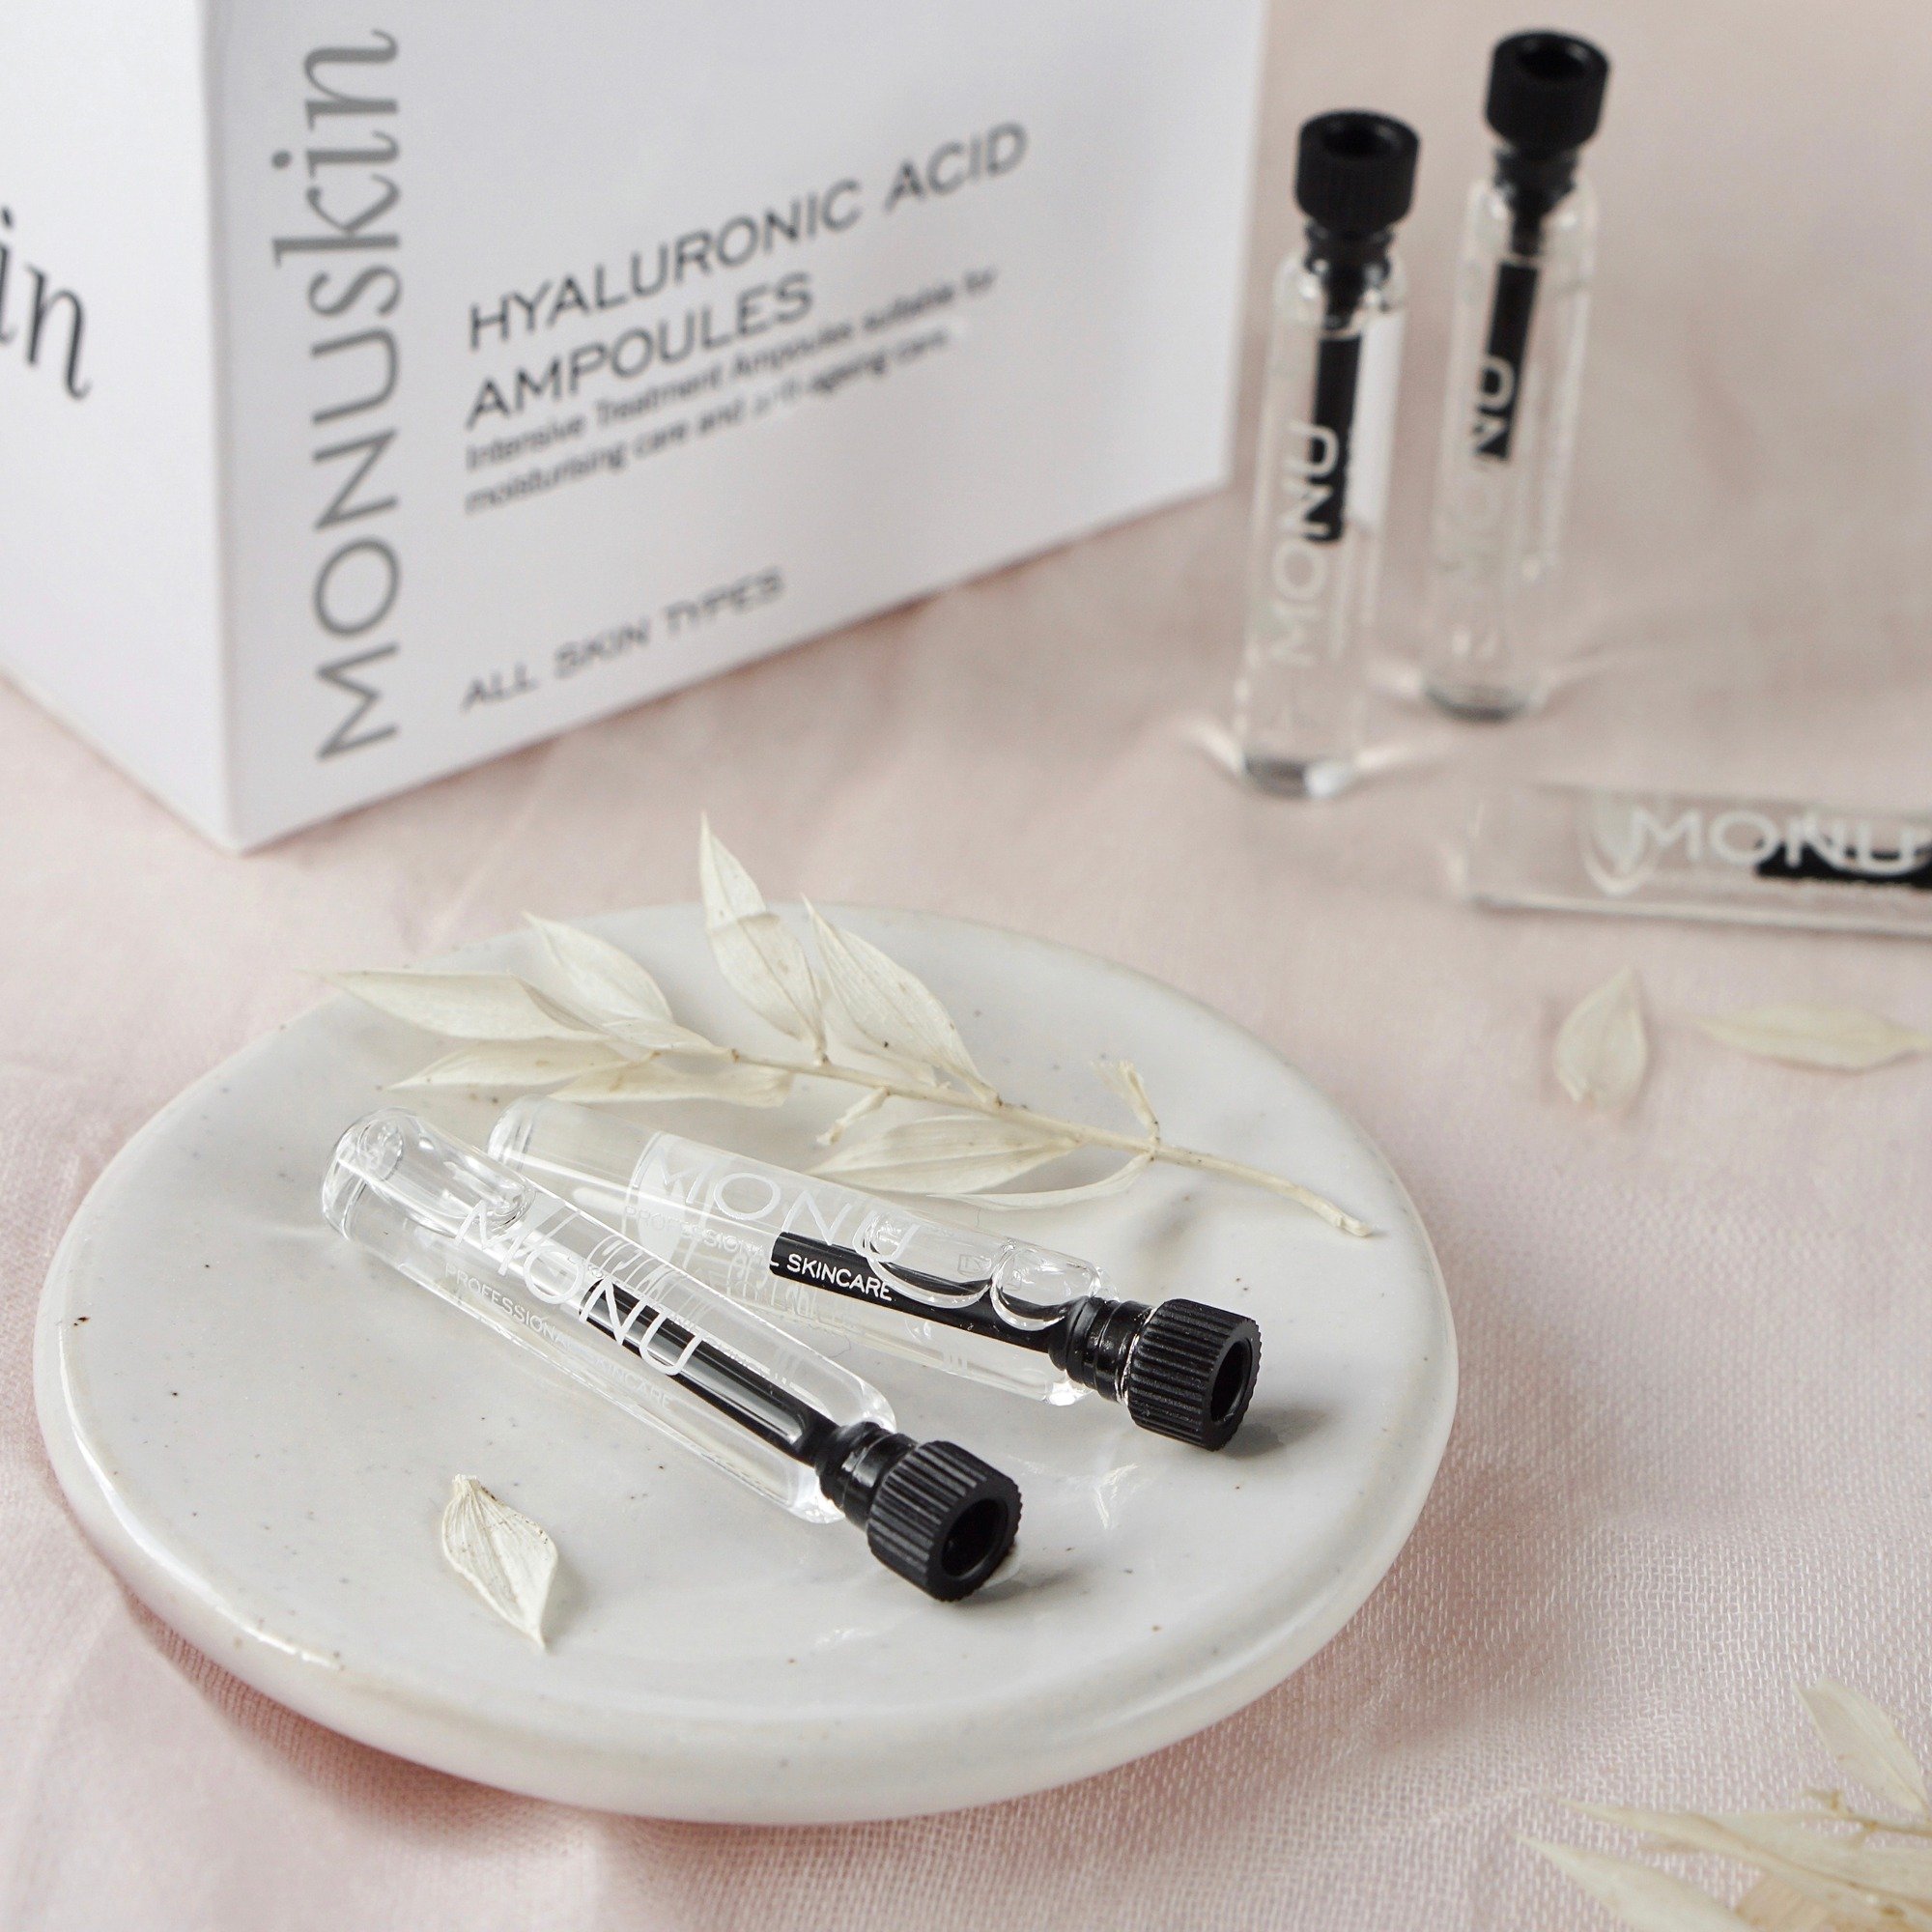 Hyaluronic Acid Ampoules a 10 day course for visibly more plumper skin with a super youthful bounce

 #smallbatchskincareuk #cleanbeautyblogger #professionalskintherapist #beautytherapist #smallbatchskincare #hyaluronicacid #hyaluronic_acid #hyaluron